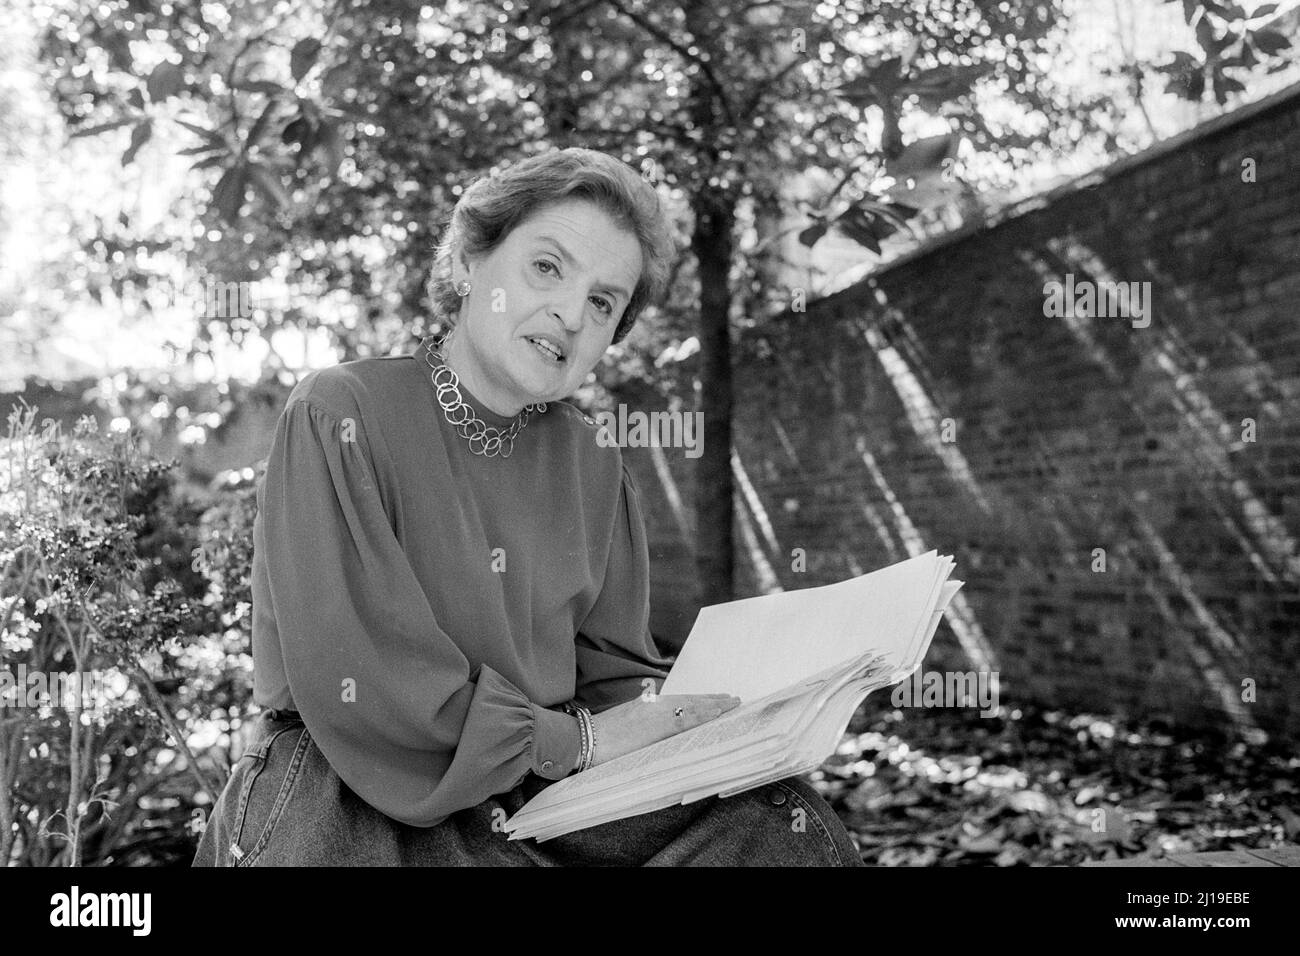 1988 , Georgetown , Washington, D.C. , USA : The american politician MADELEINE Korbel ALBRIGHT ( Marie Jana Korbelová , 1937 - 2022 ), was an American diplomat who served as the 64th United States Secretary of State from 1997 to 2001 under President Bill Clinton . She was the first female secretary of state in U.S. history.  In this photo Professor Madeliene Albright named foreign policy adviser for Democratic candidate Michael Dukakis ' campaign at her Georgetown home .  Photo by Michael Geissinger . - Segretario alla Presidenza degli Stati Uniti d'America -   STATI UNITI AMERICA - POLITICO - Stock Photo